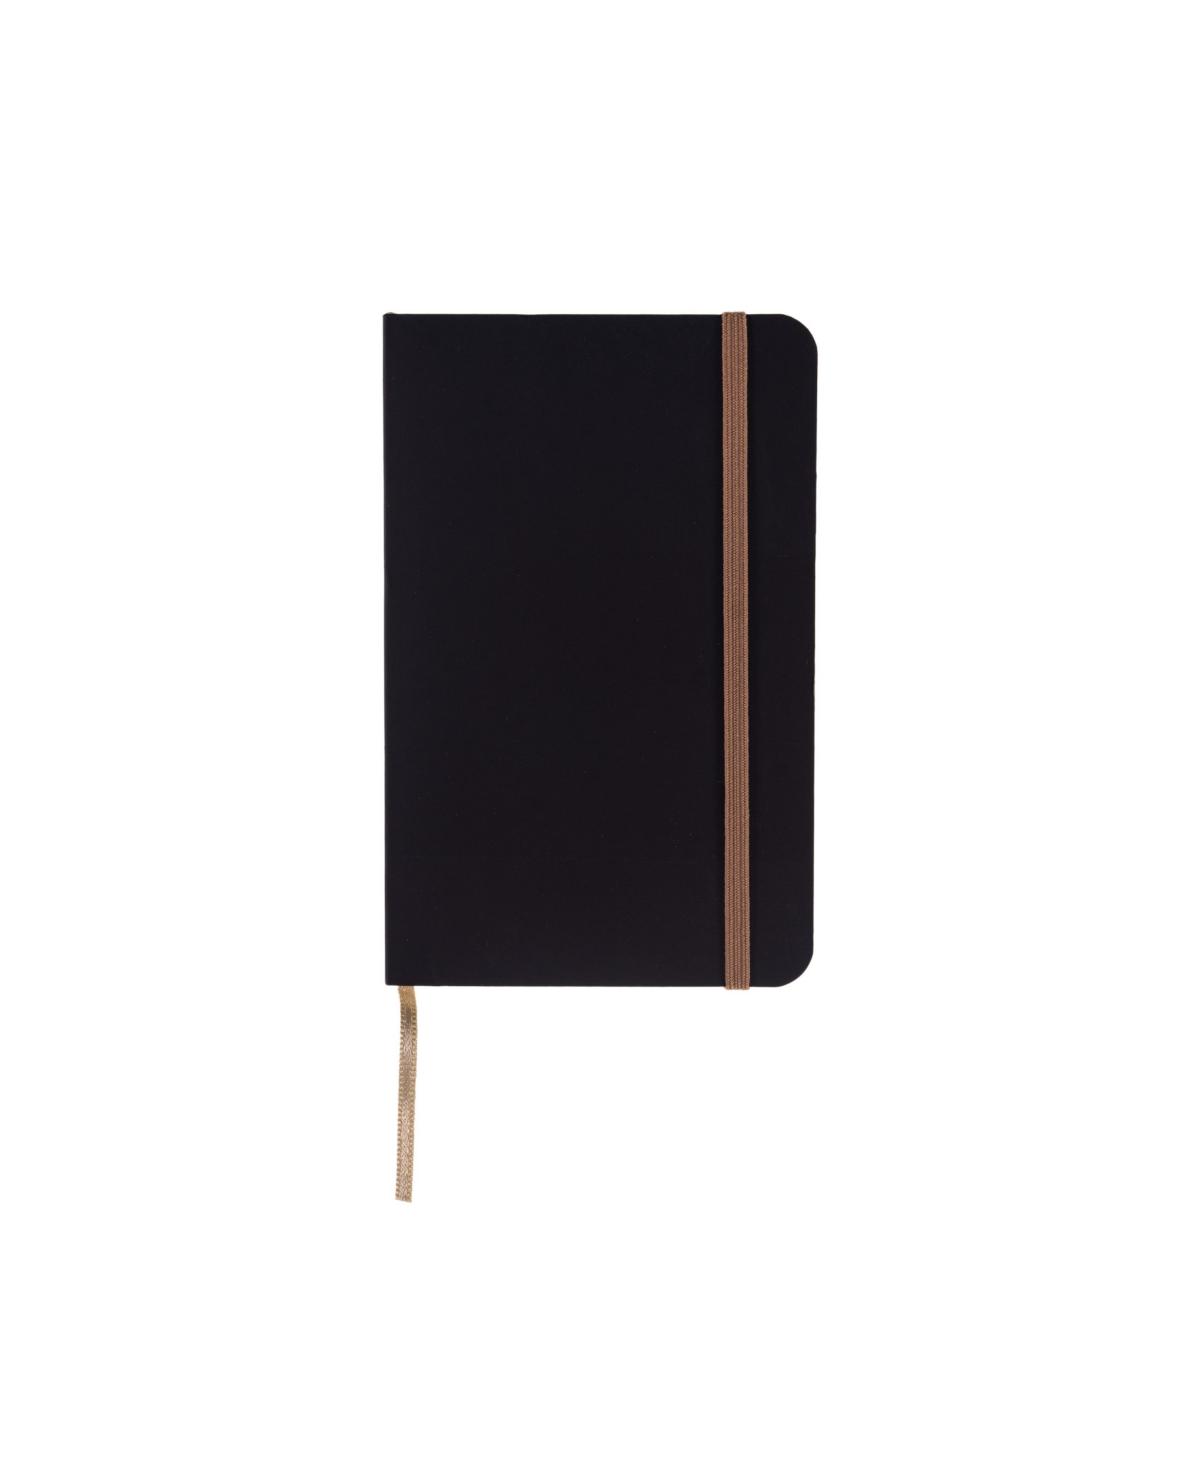 Ispira Soft Cover Lined Notebook, 3.5" x 5.5" - Brown